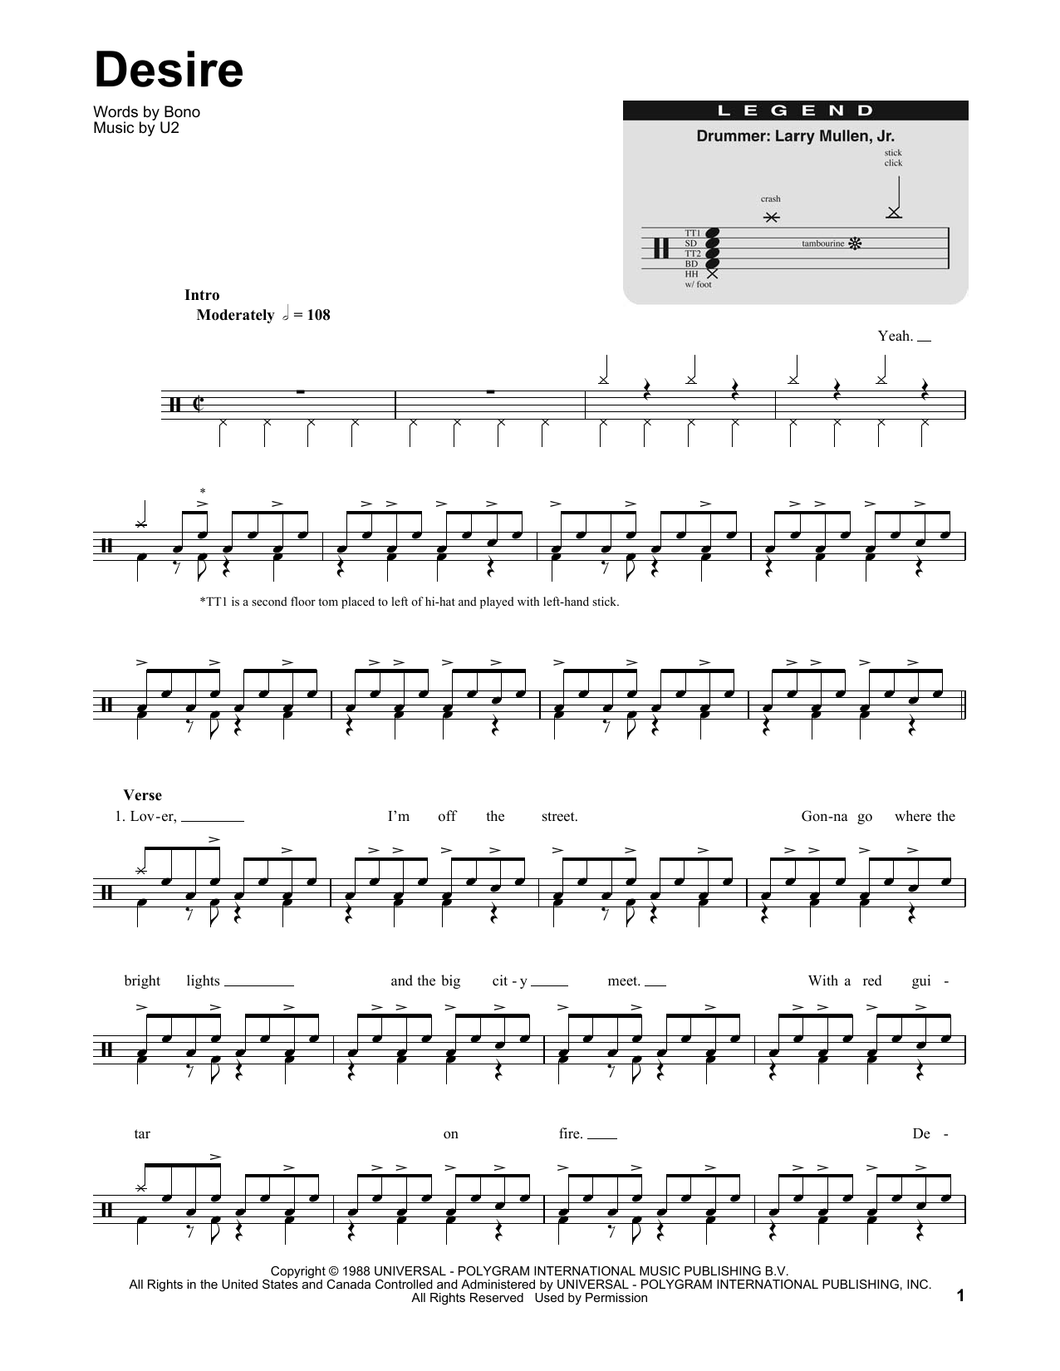 Desire - U2 (The Band) - Full Drum Transcription / Drum Sheet Music - SheetMusicDirect DT